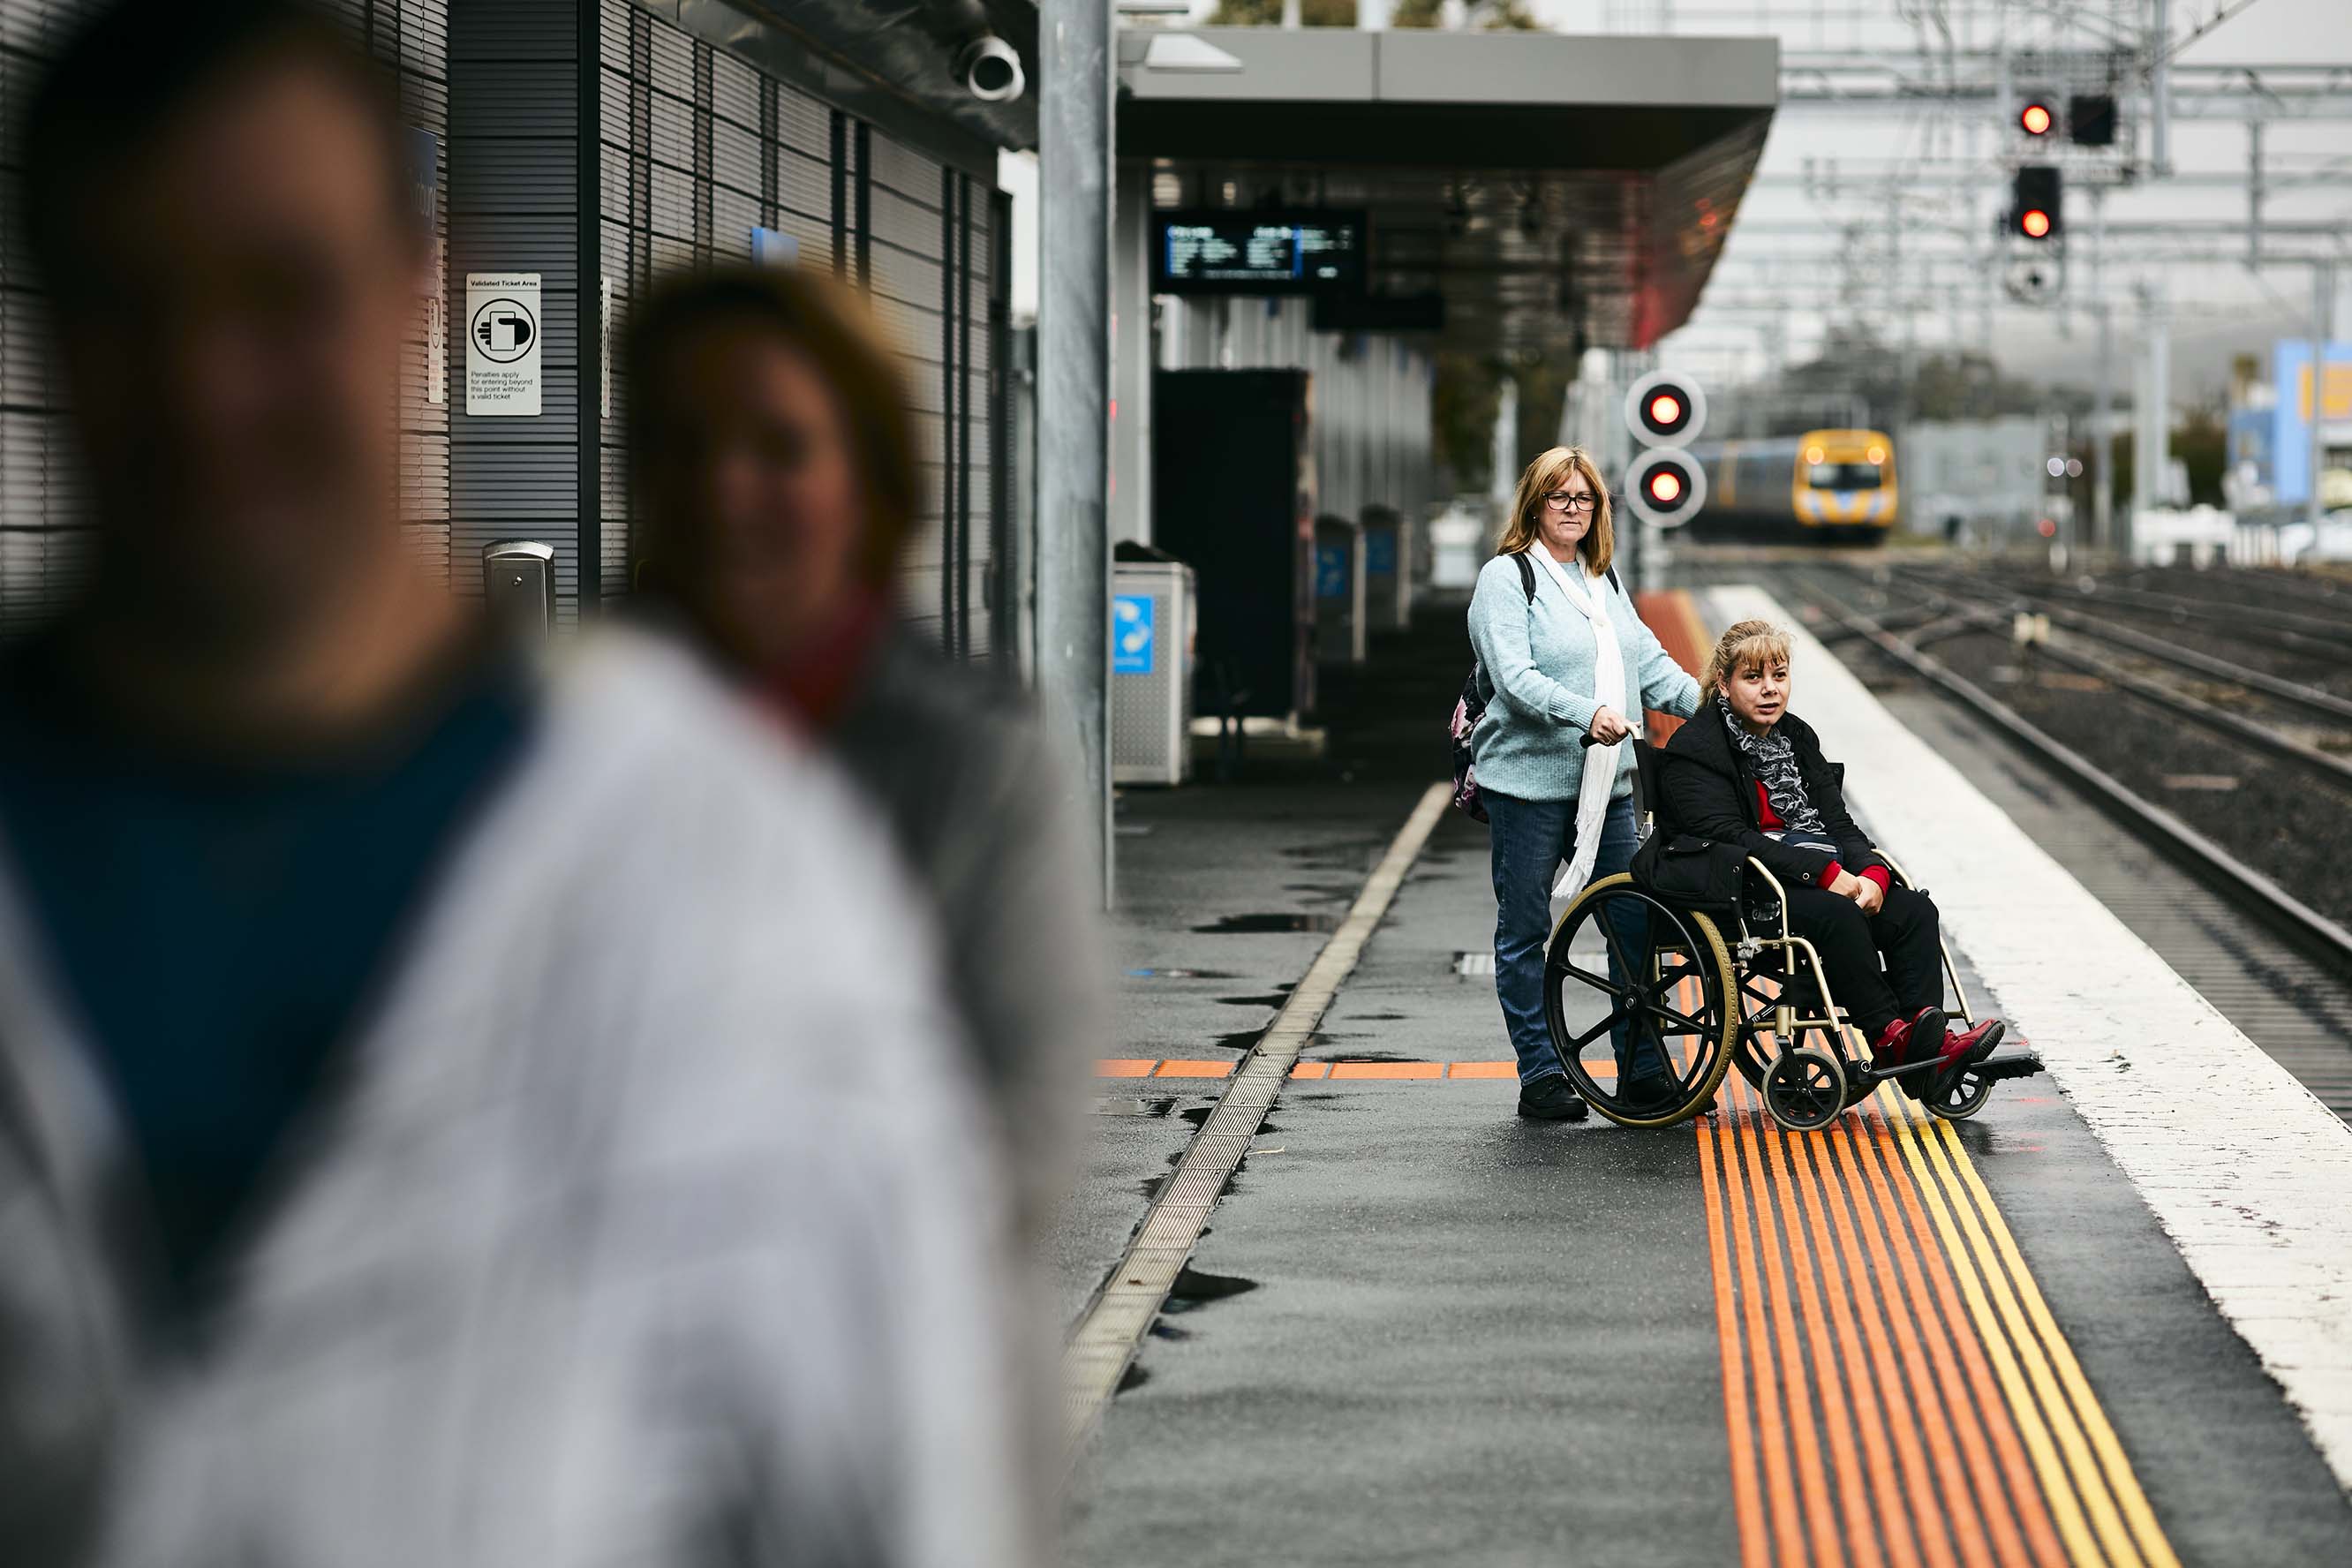 Image shows a person in a wheelchair waiting on a station platform with her carer as a train approaches in the background.